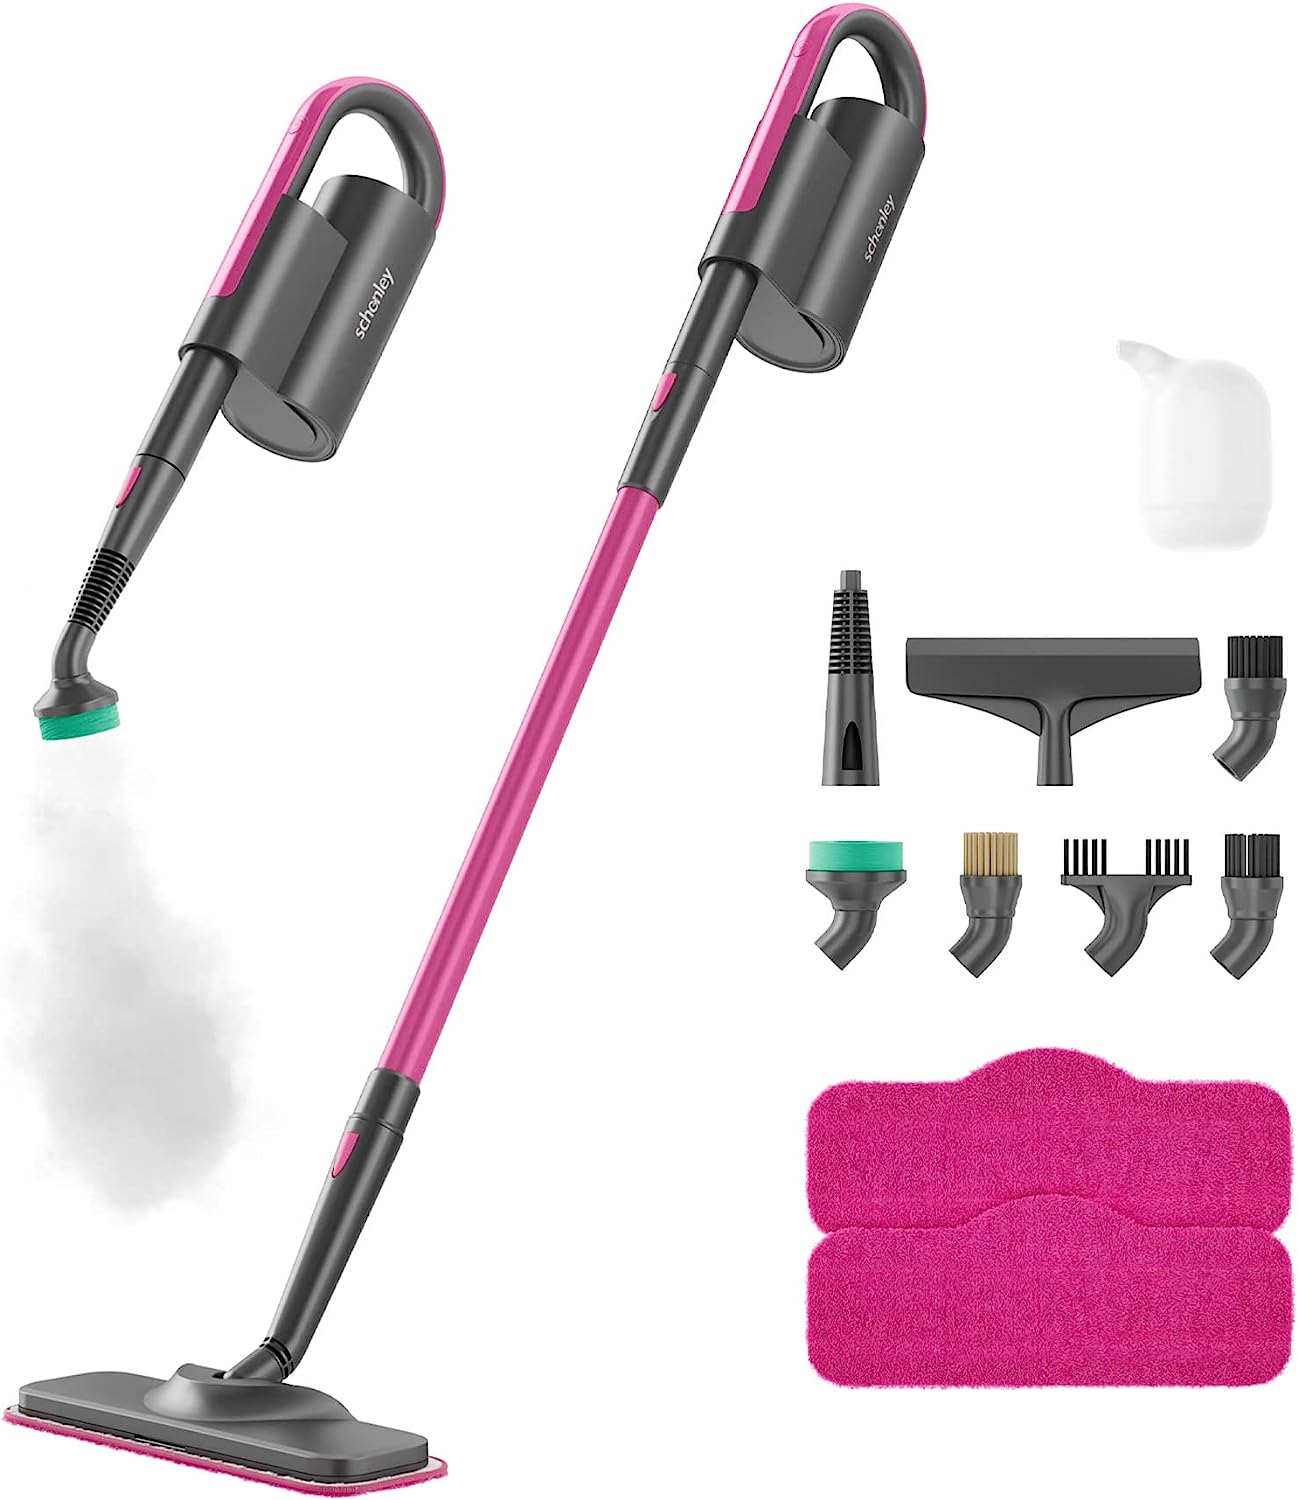 https://bigbigmart.com/wp-content/uploads/2023/08/Schenley-Steam-Mop-Cleaner-with-Detachable-Handheld-Steamer-for-Cleaning-Hardwood-Laminate-Floor-Tiles-and-Grout-with-7-in-1-Multi-purpose-Accessories-and-Washable-Microfiber-Pads.jpg